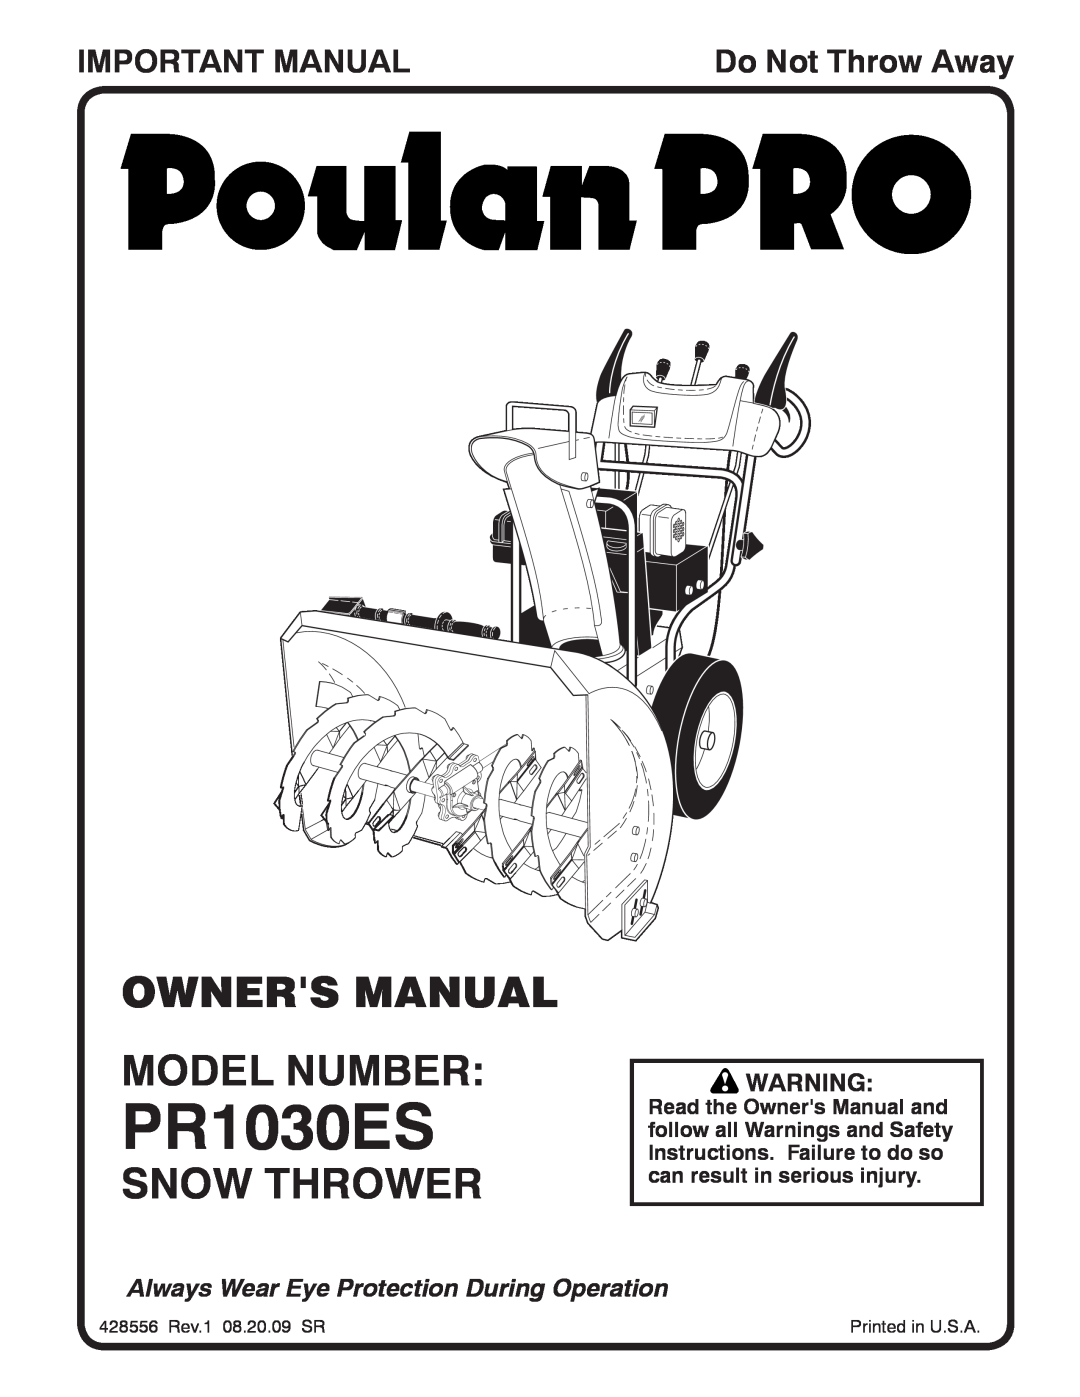 Poulan 428556 owner manual Owners Manual Model Number, Snow Thrower, Important Manual, PR1030ES, Do Not Throw Away 